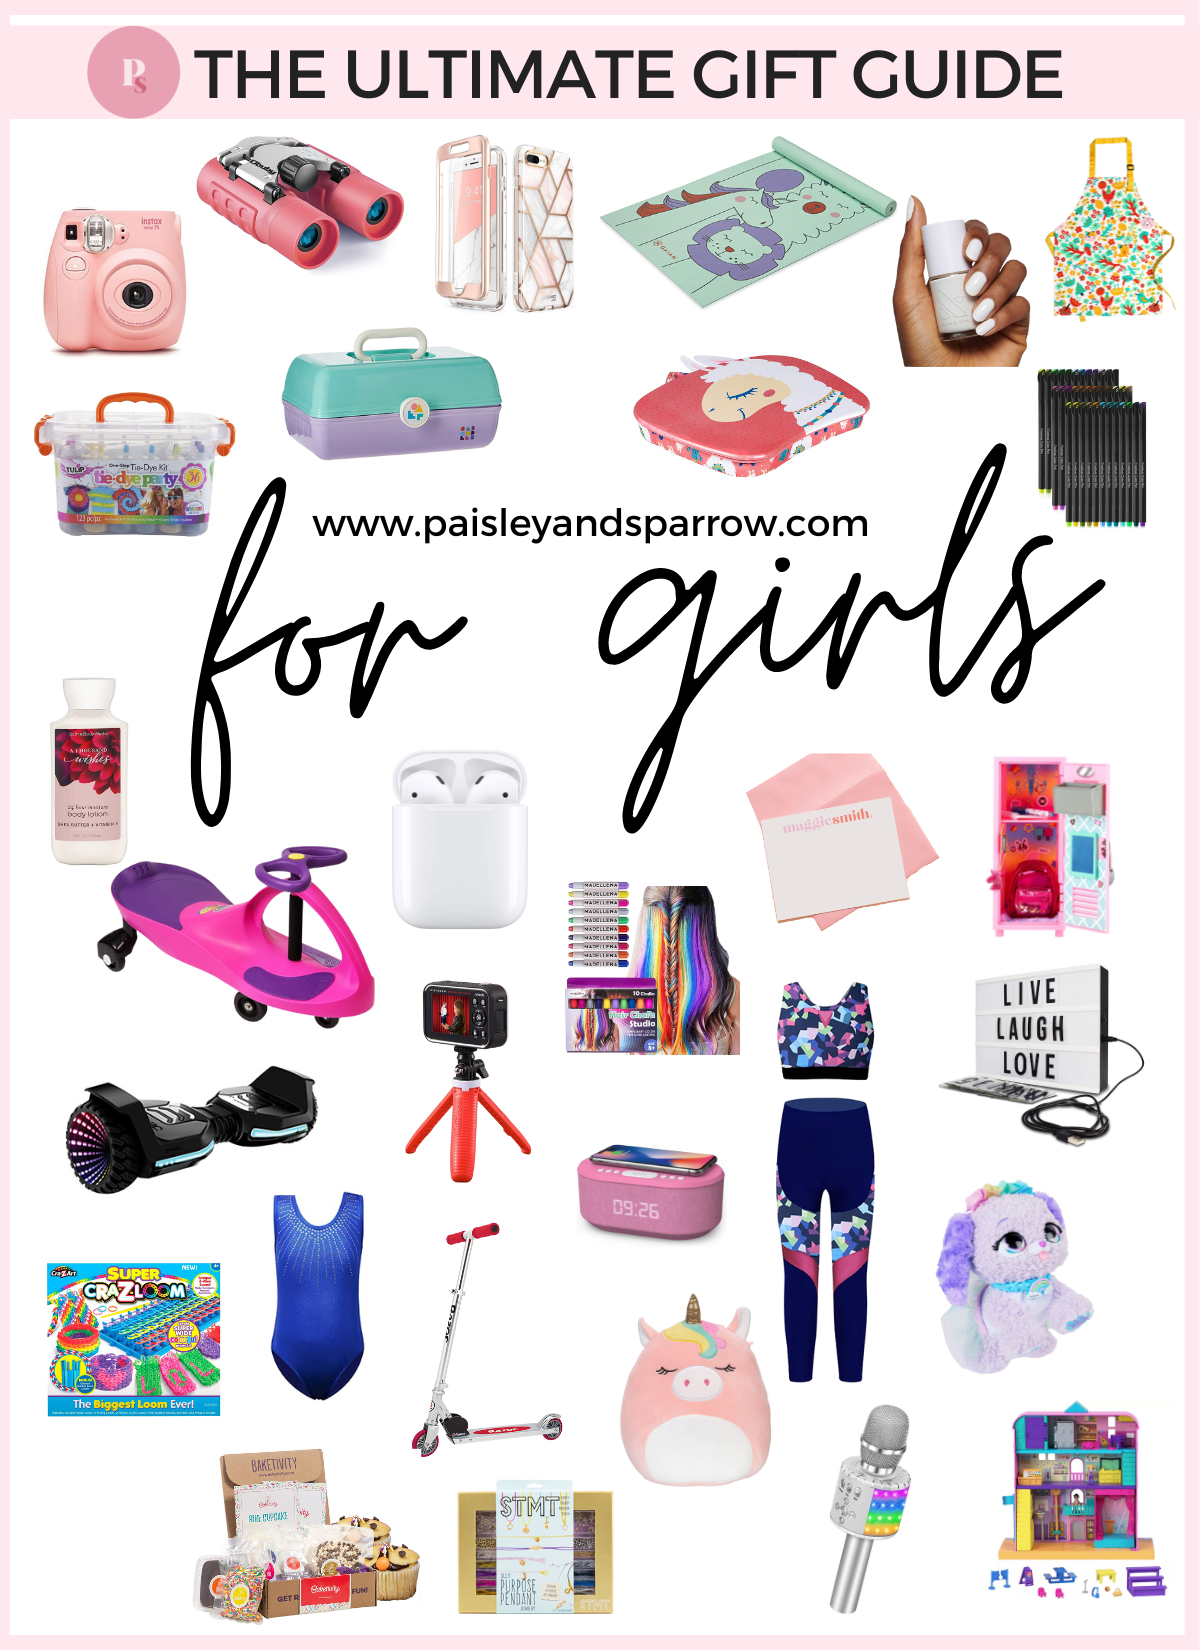 Gift Guide for 10-12 Year Old Tween Girls - Stephanie Hanna Blog